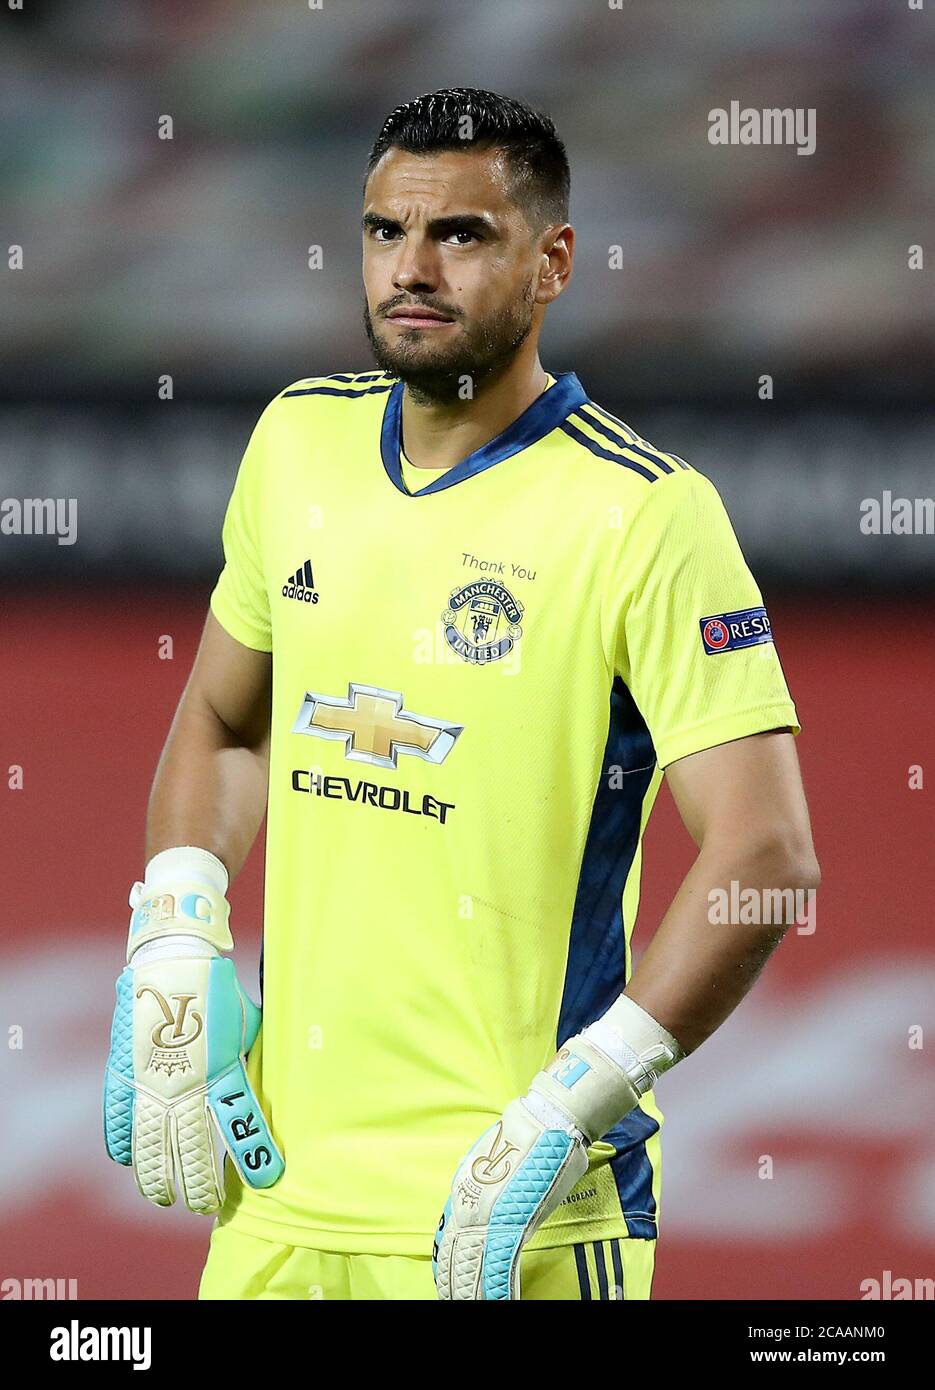 Manchester United goalkeeper Sergio Romero during the UEFA Europa League  round of 16 second leg match at Old Trafford, Manchester. Wednesday August  5, 2020. See PA story SOCCER Man Utd. Photo credit